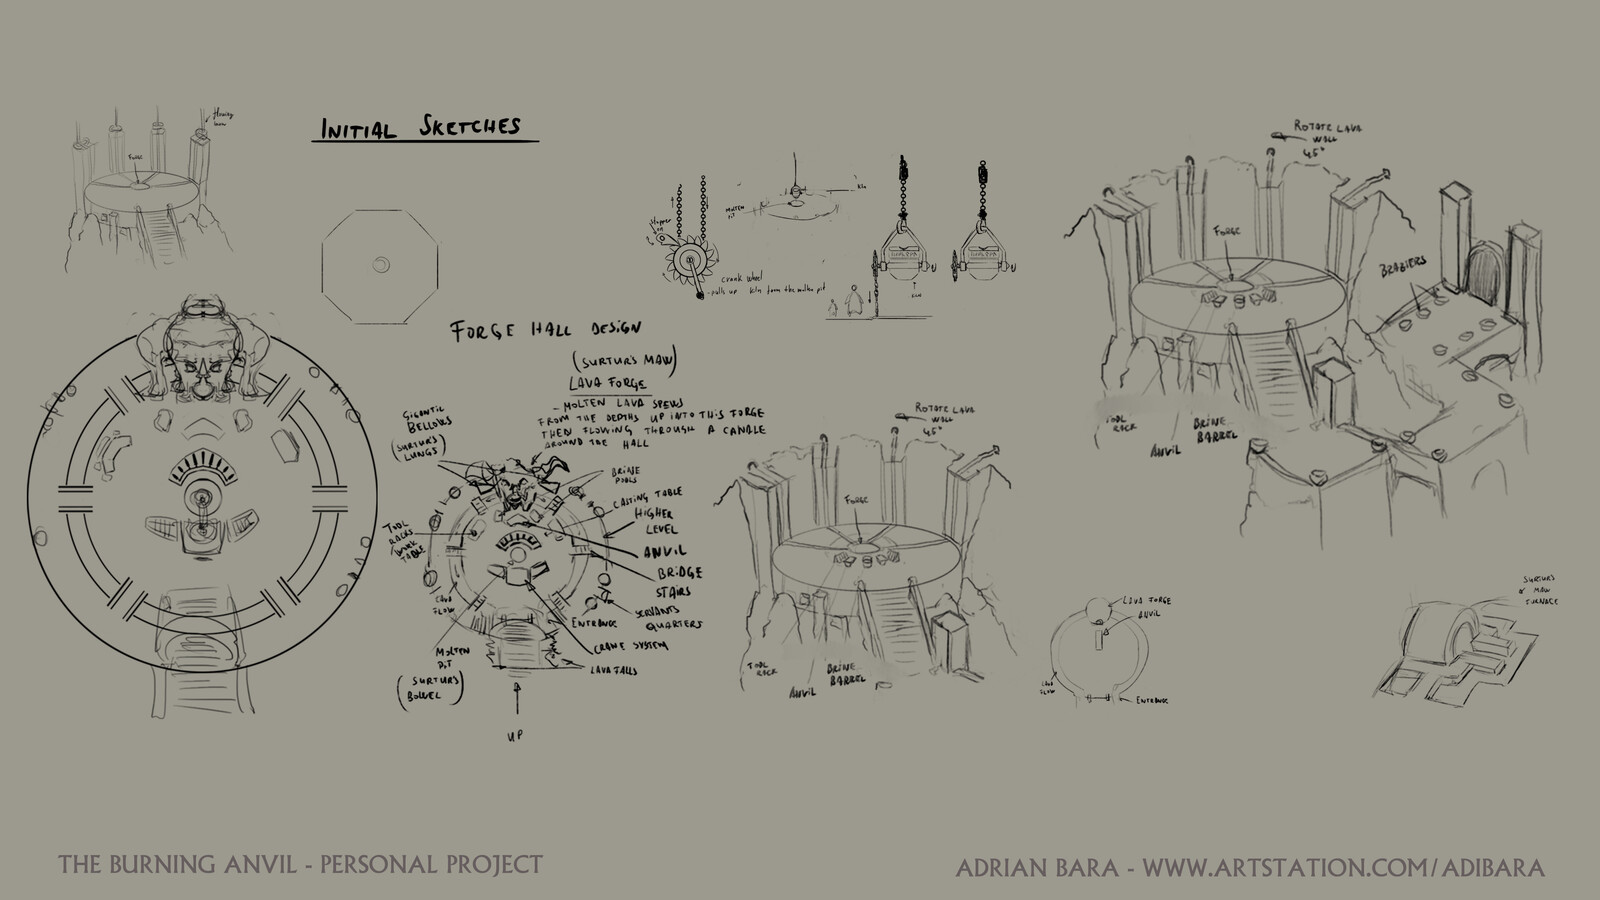 The-Burning-Anvil-Initial Sketches